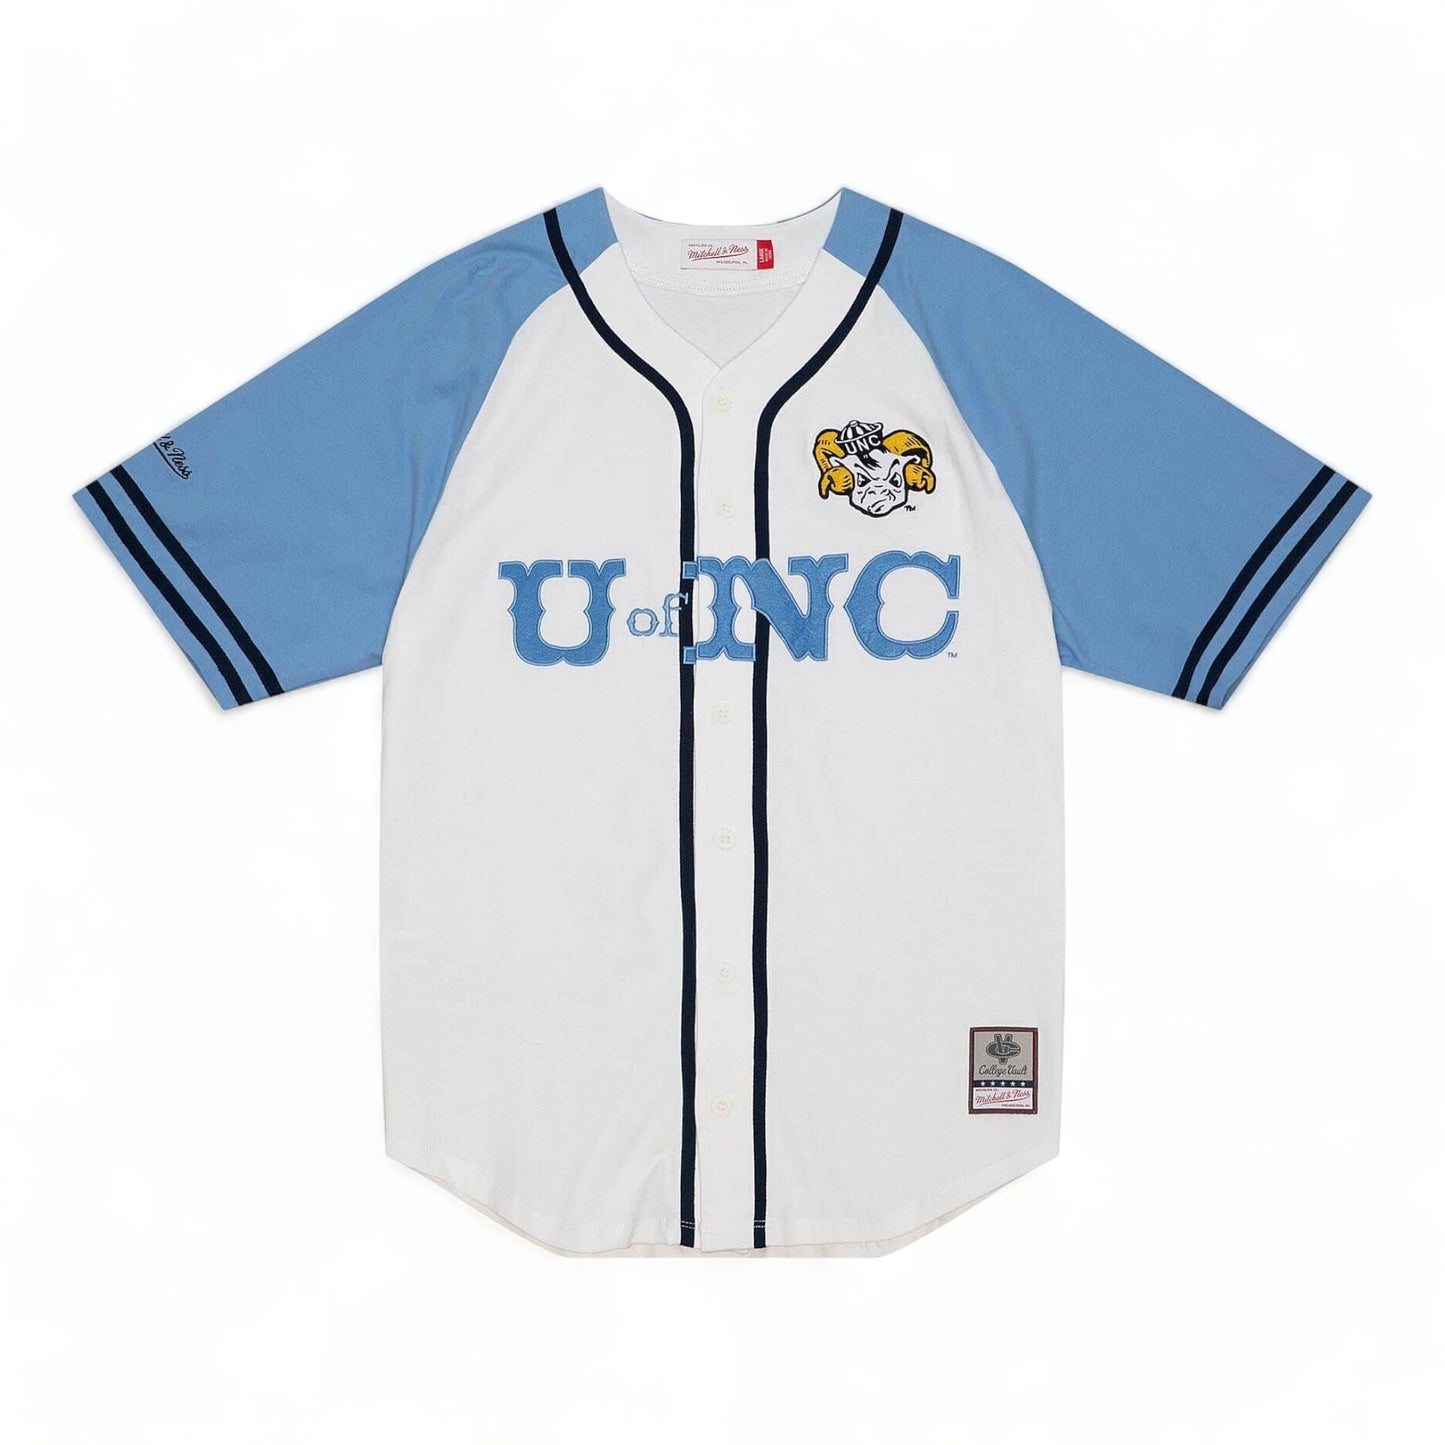 MITCHELL & NESS PRACTICE DAY BUTTON FRONT JERSEY UNIVERSITY OF NORTH CAROLINA